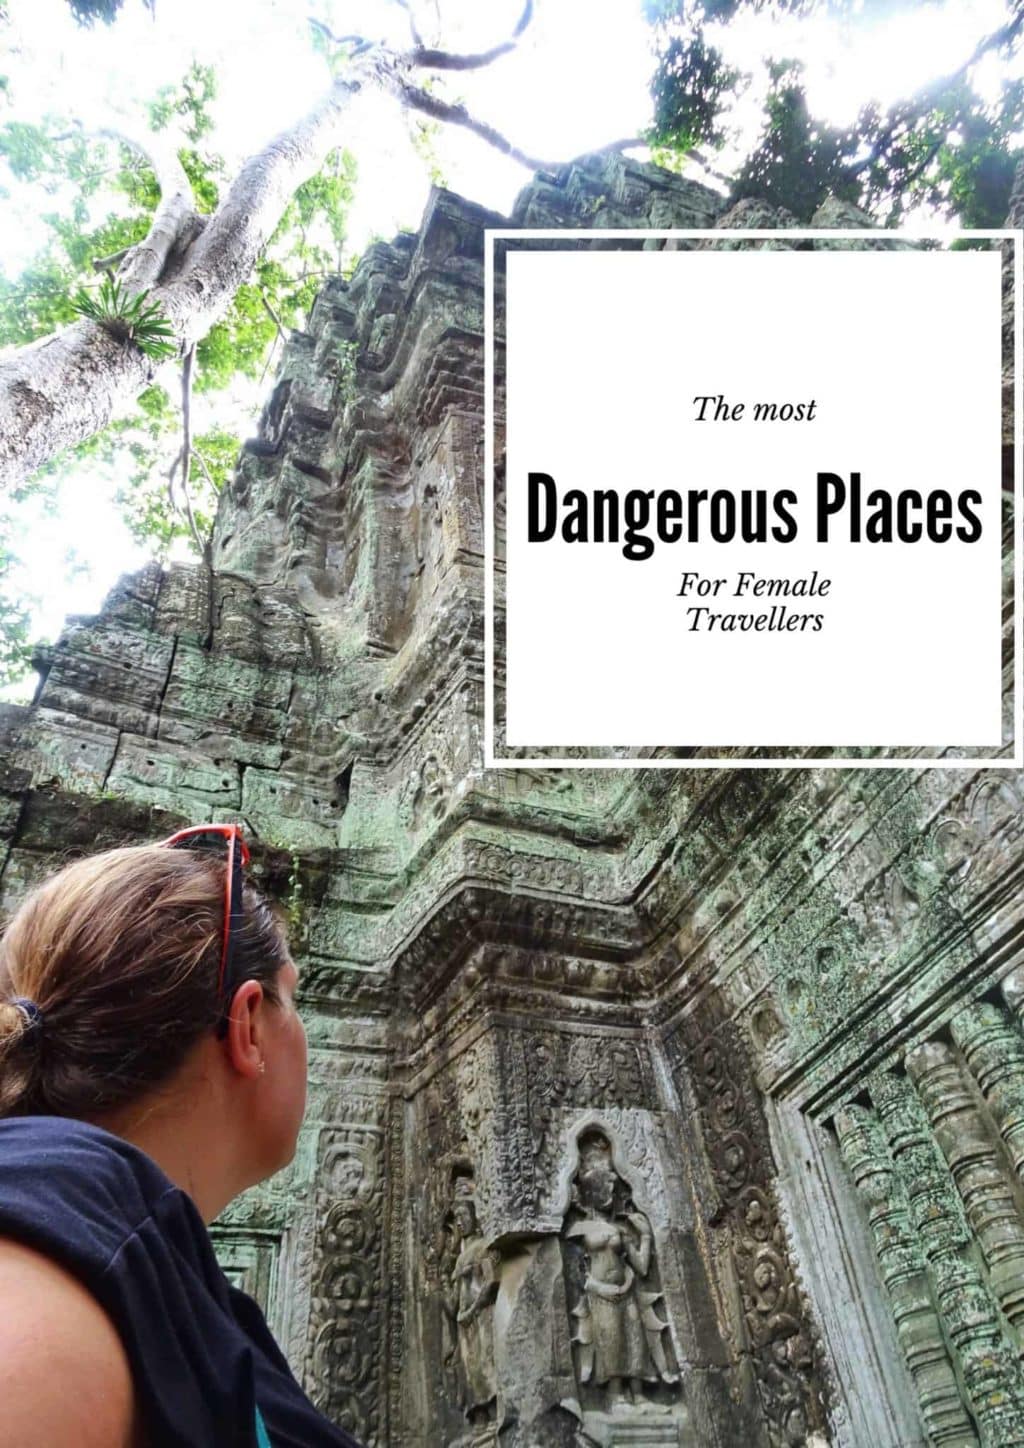 Most dangerous places for female travellers